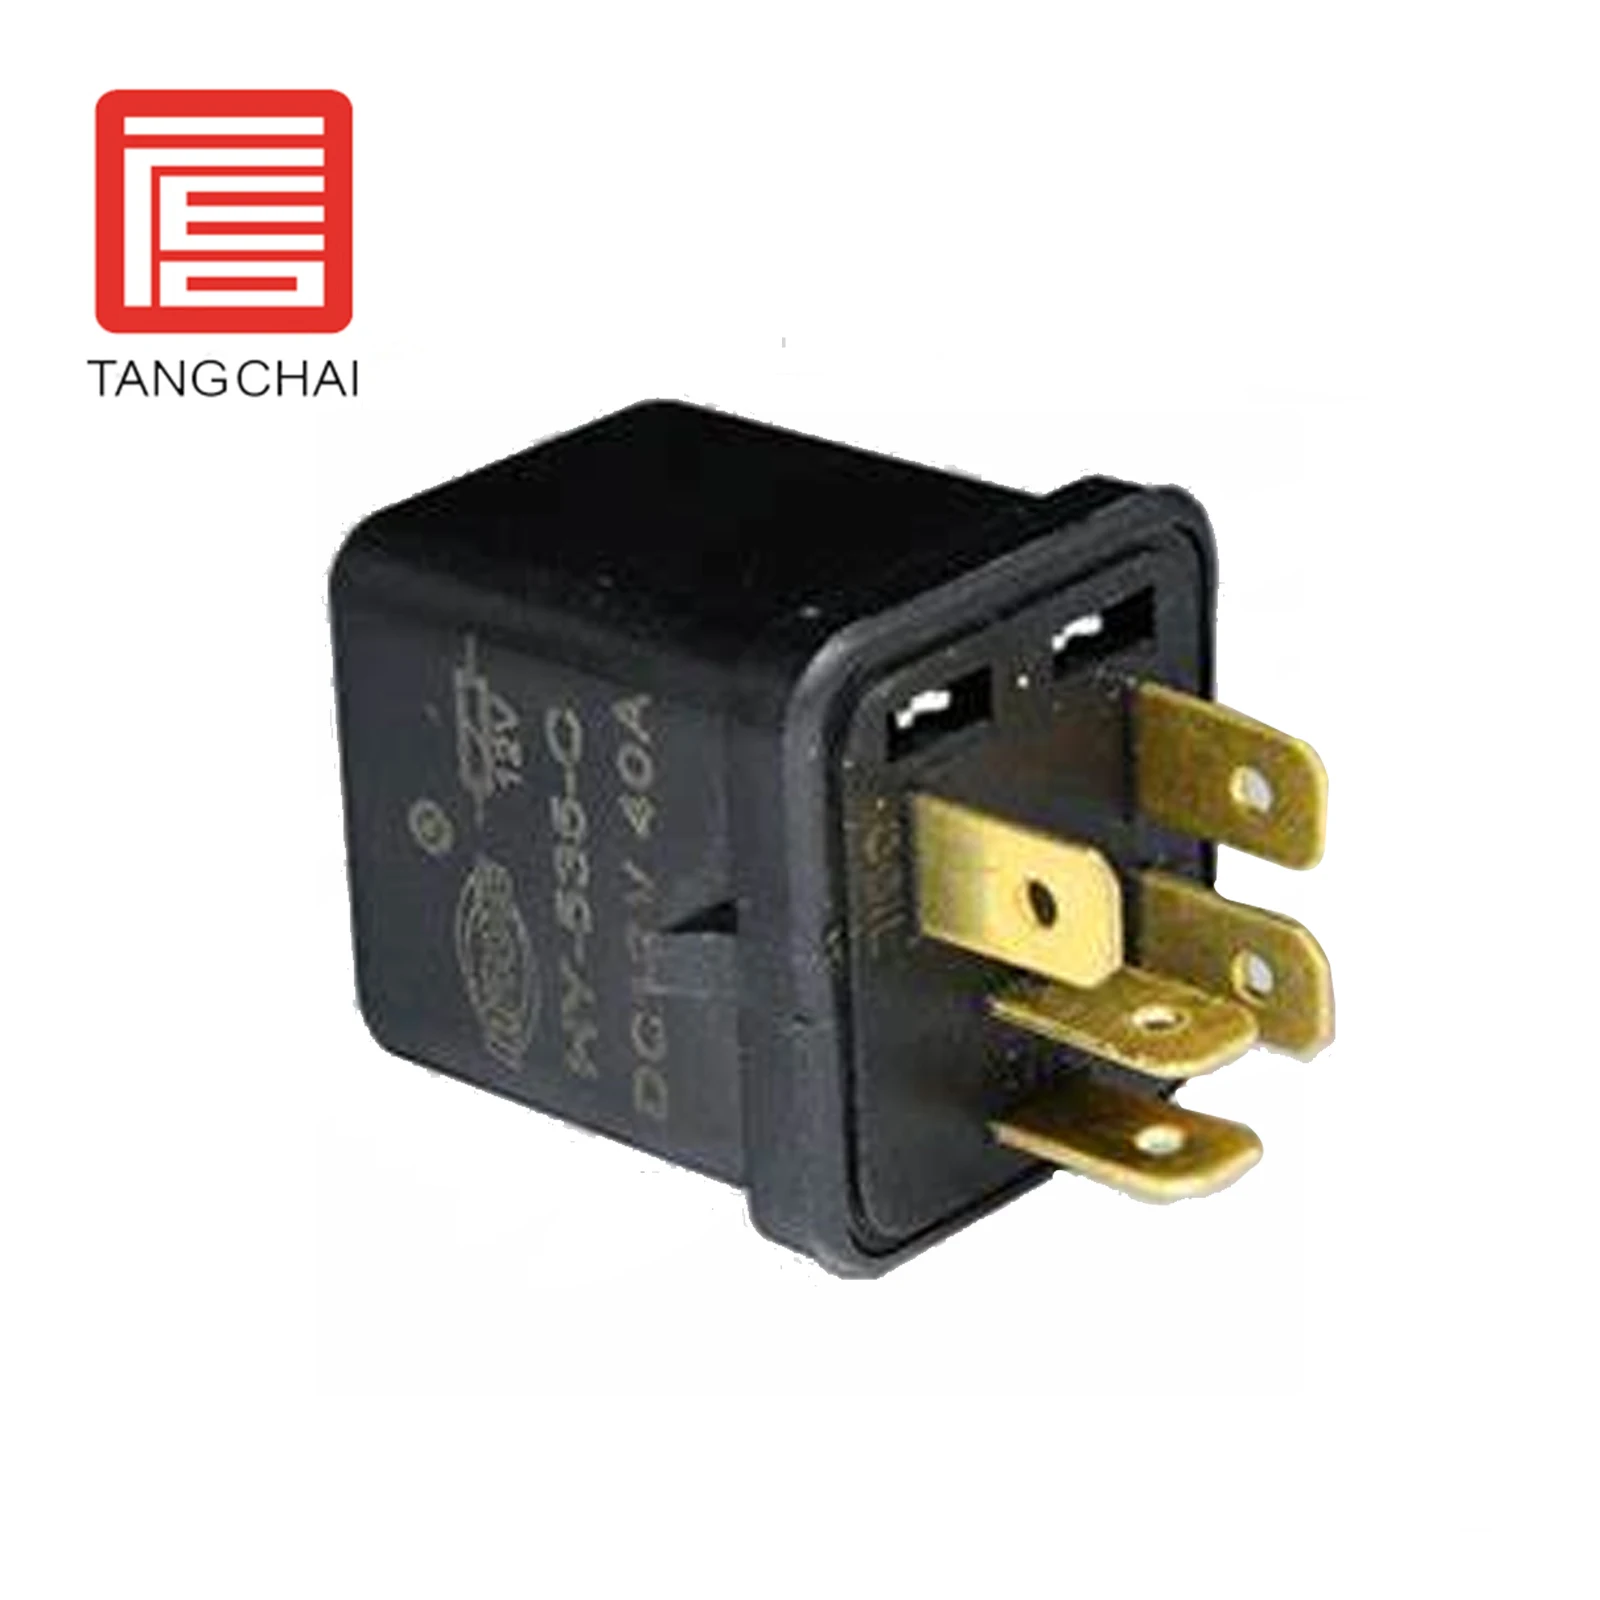 Tangchai Relay Suitable for 8-	